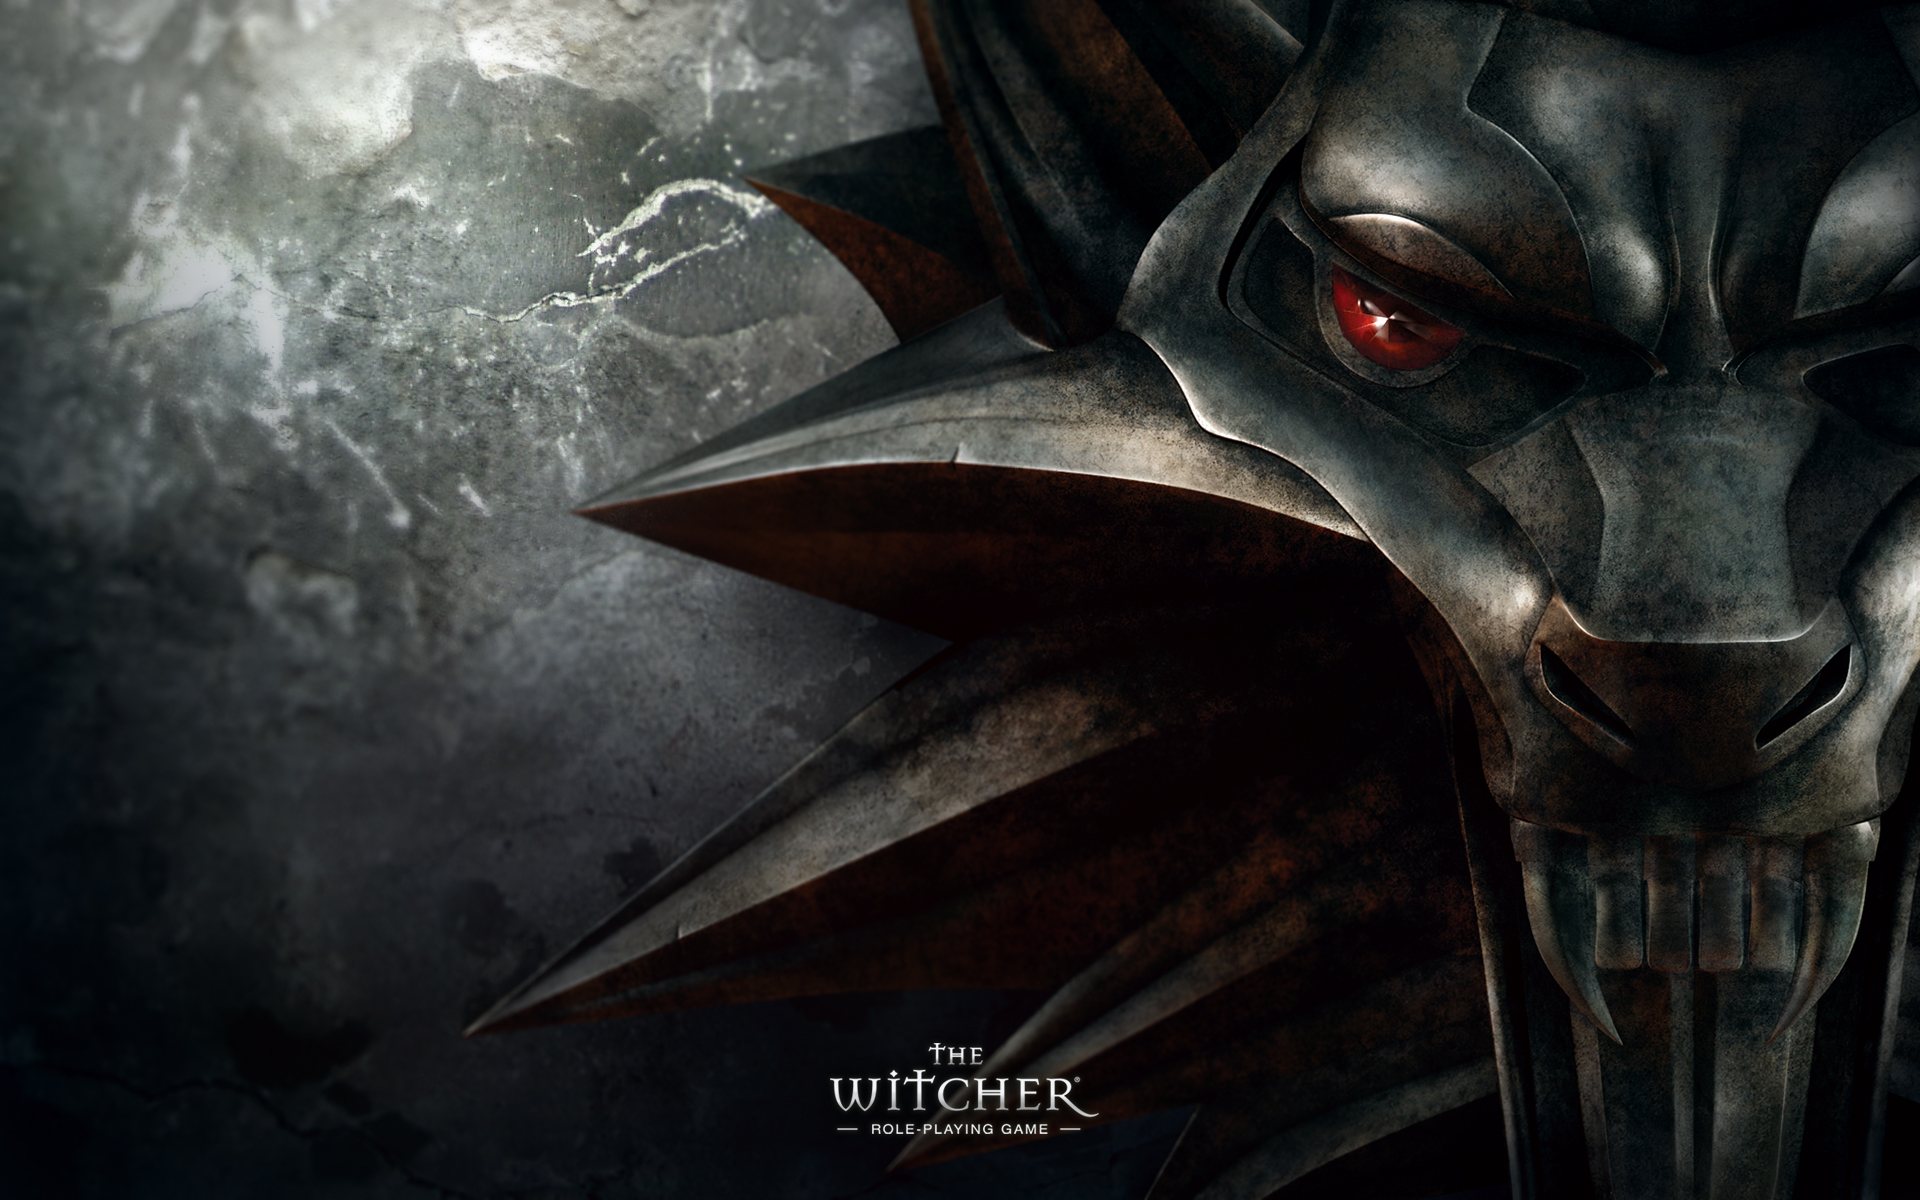 The Witcher Wallpapers the witcher hd wallpaper Wallpapereorg